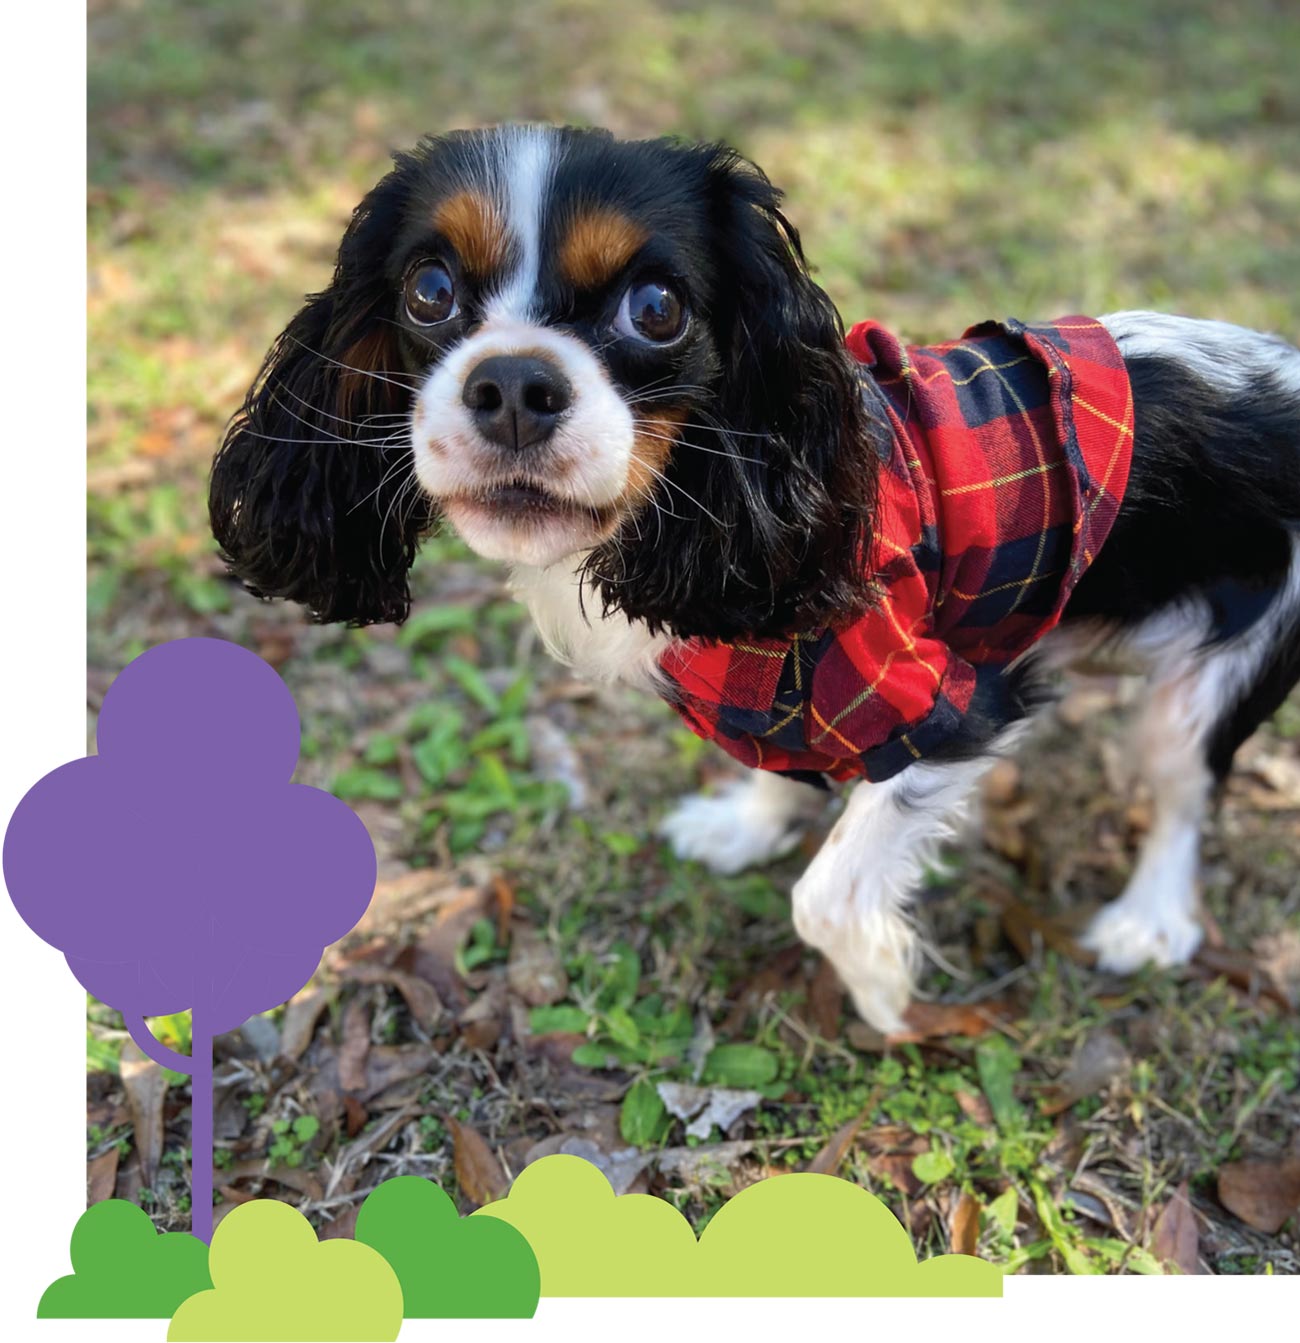 close view of a white, black and brown Cavalier King Charles Spaniel wearing a red plaid shirt and standing in grass